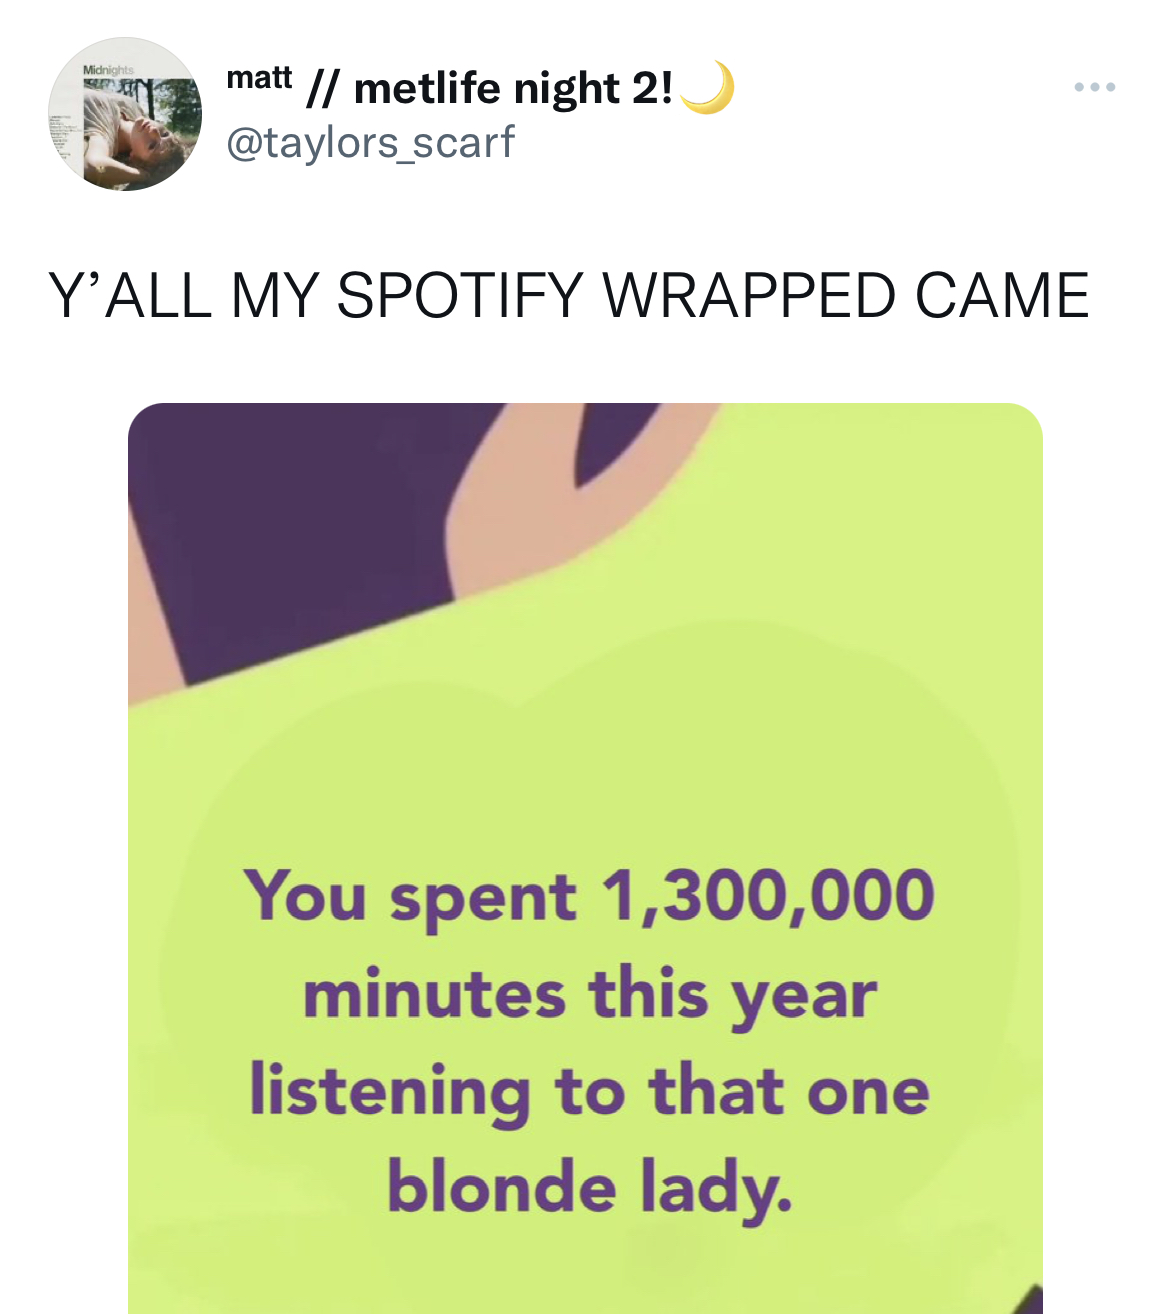 Spotify Wrapped Memes - c section - matt metlife night 2! Y'All My Spotify Wrapped Came You spent 1,300,000 minutes this year listening to that one blonde lady.